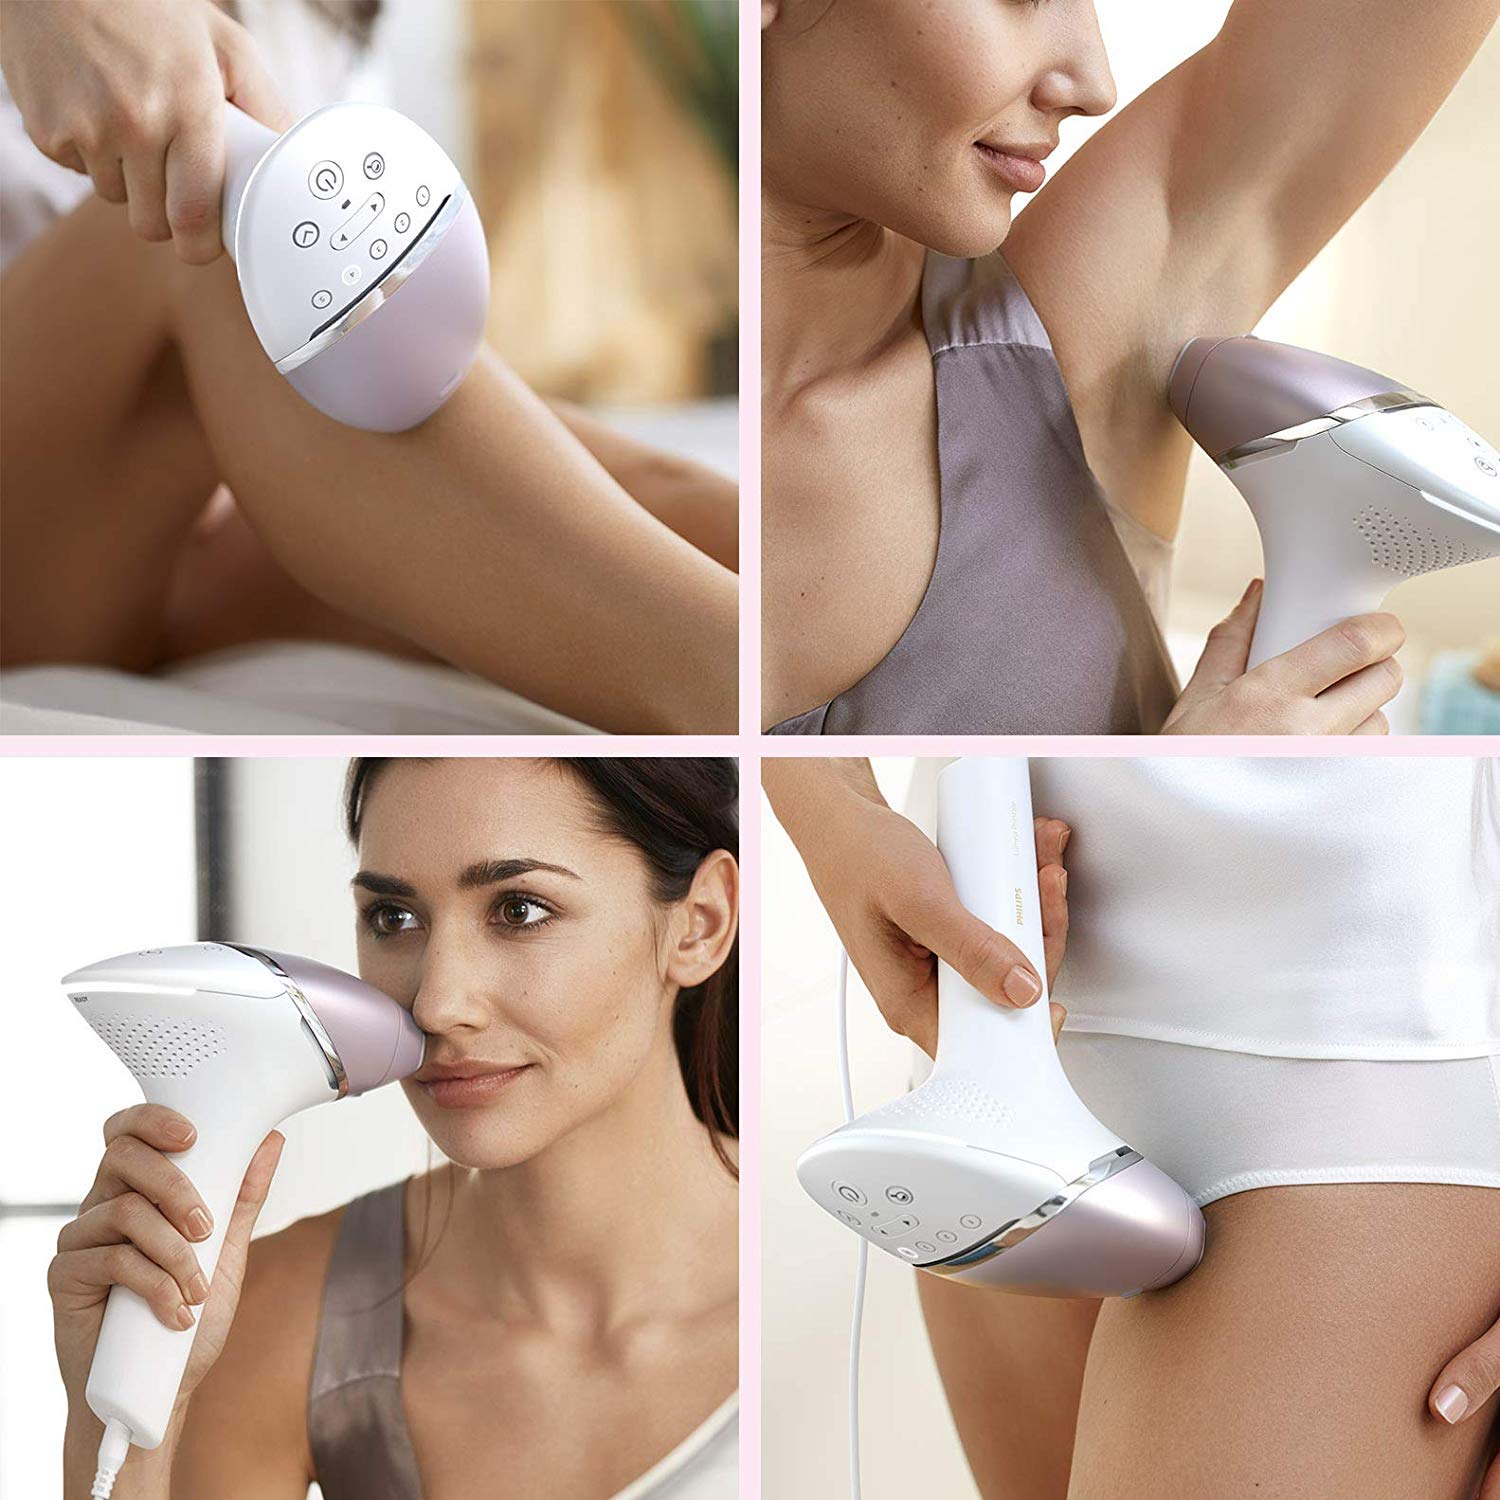 Philips Lumea IPL Hair Removal 8000 Series - Hair Removal Device with  SenseIQ Technology, 4 Attachments (BRI949/00) W/Code